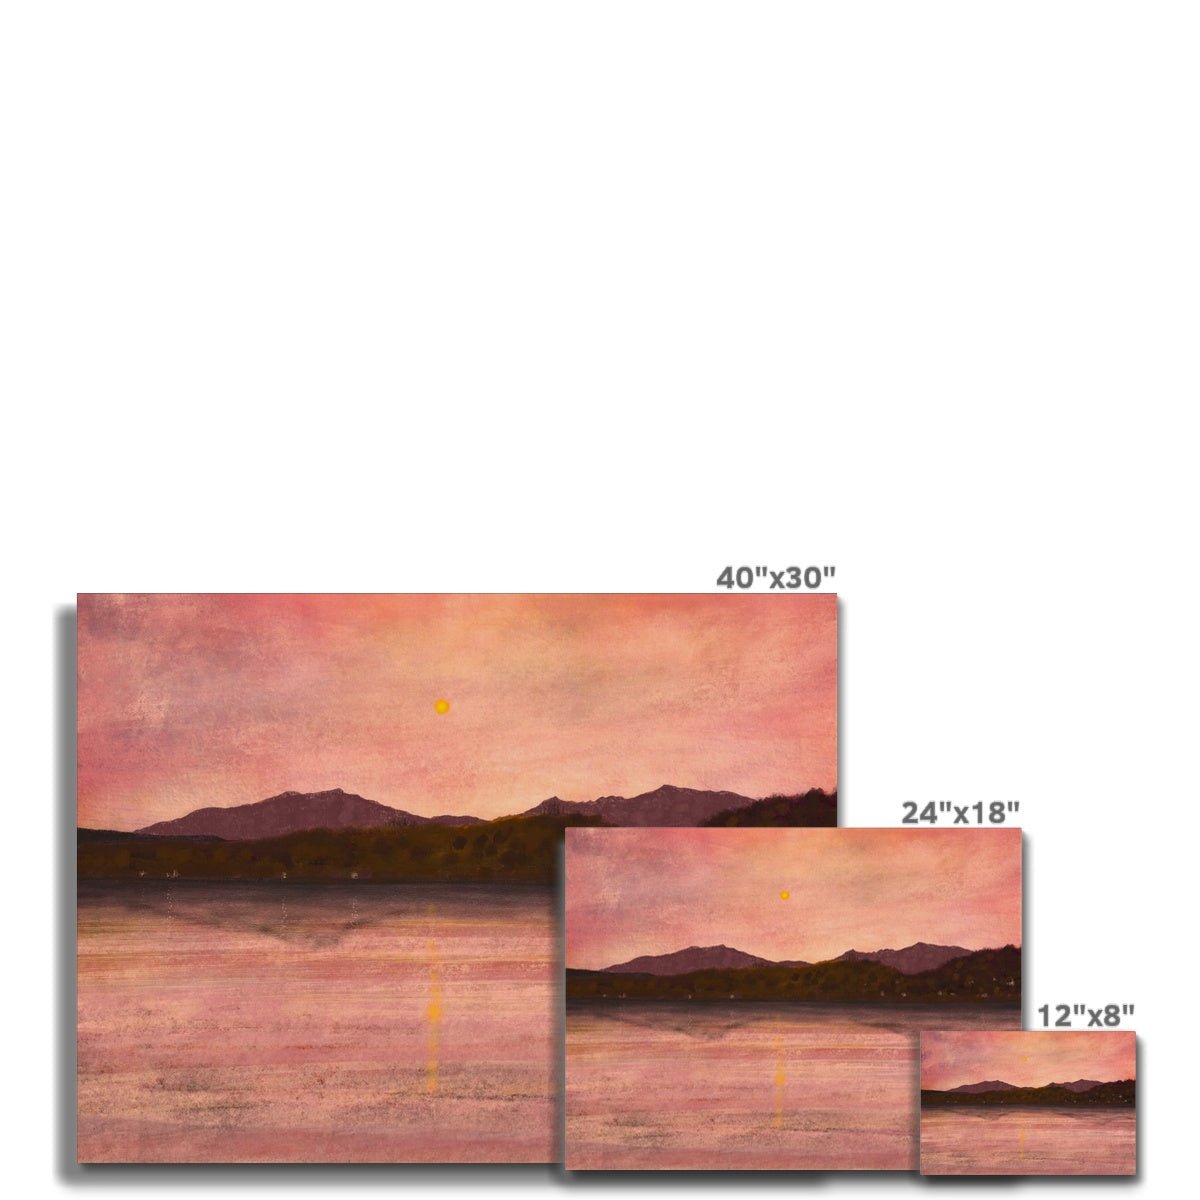 Dusk Over Arran & Bute Painting | Canvas From Scotland-Contemporary Stretched Canvas Prints-Arran Art Gallery-Paintings, Prints, Homeware, Art Gifts From Scotland By Scottish Artist Kevin Hunter